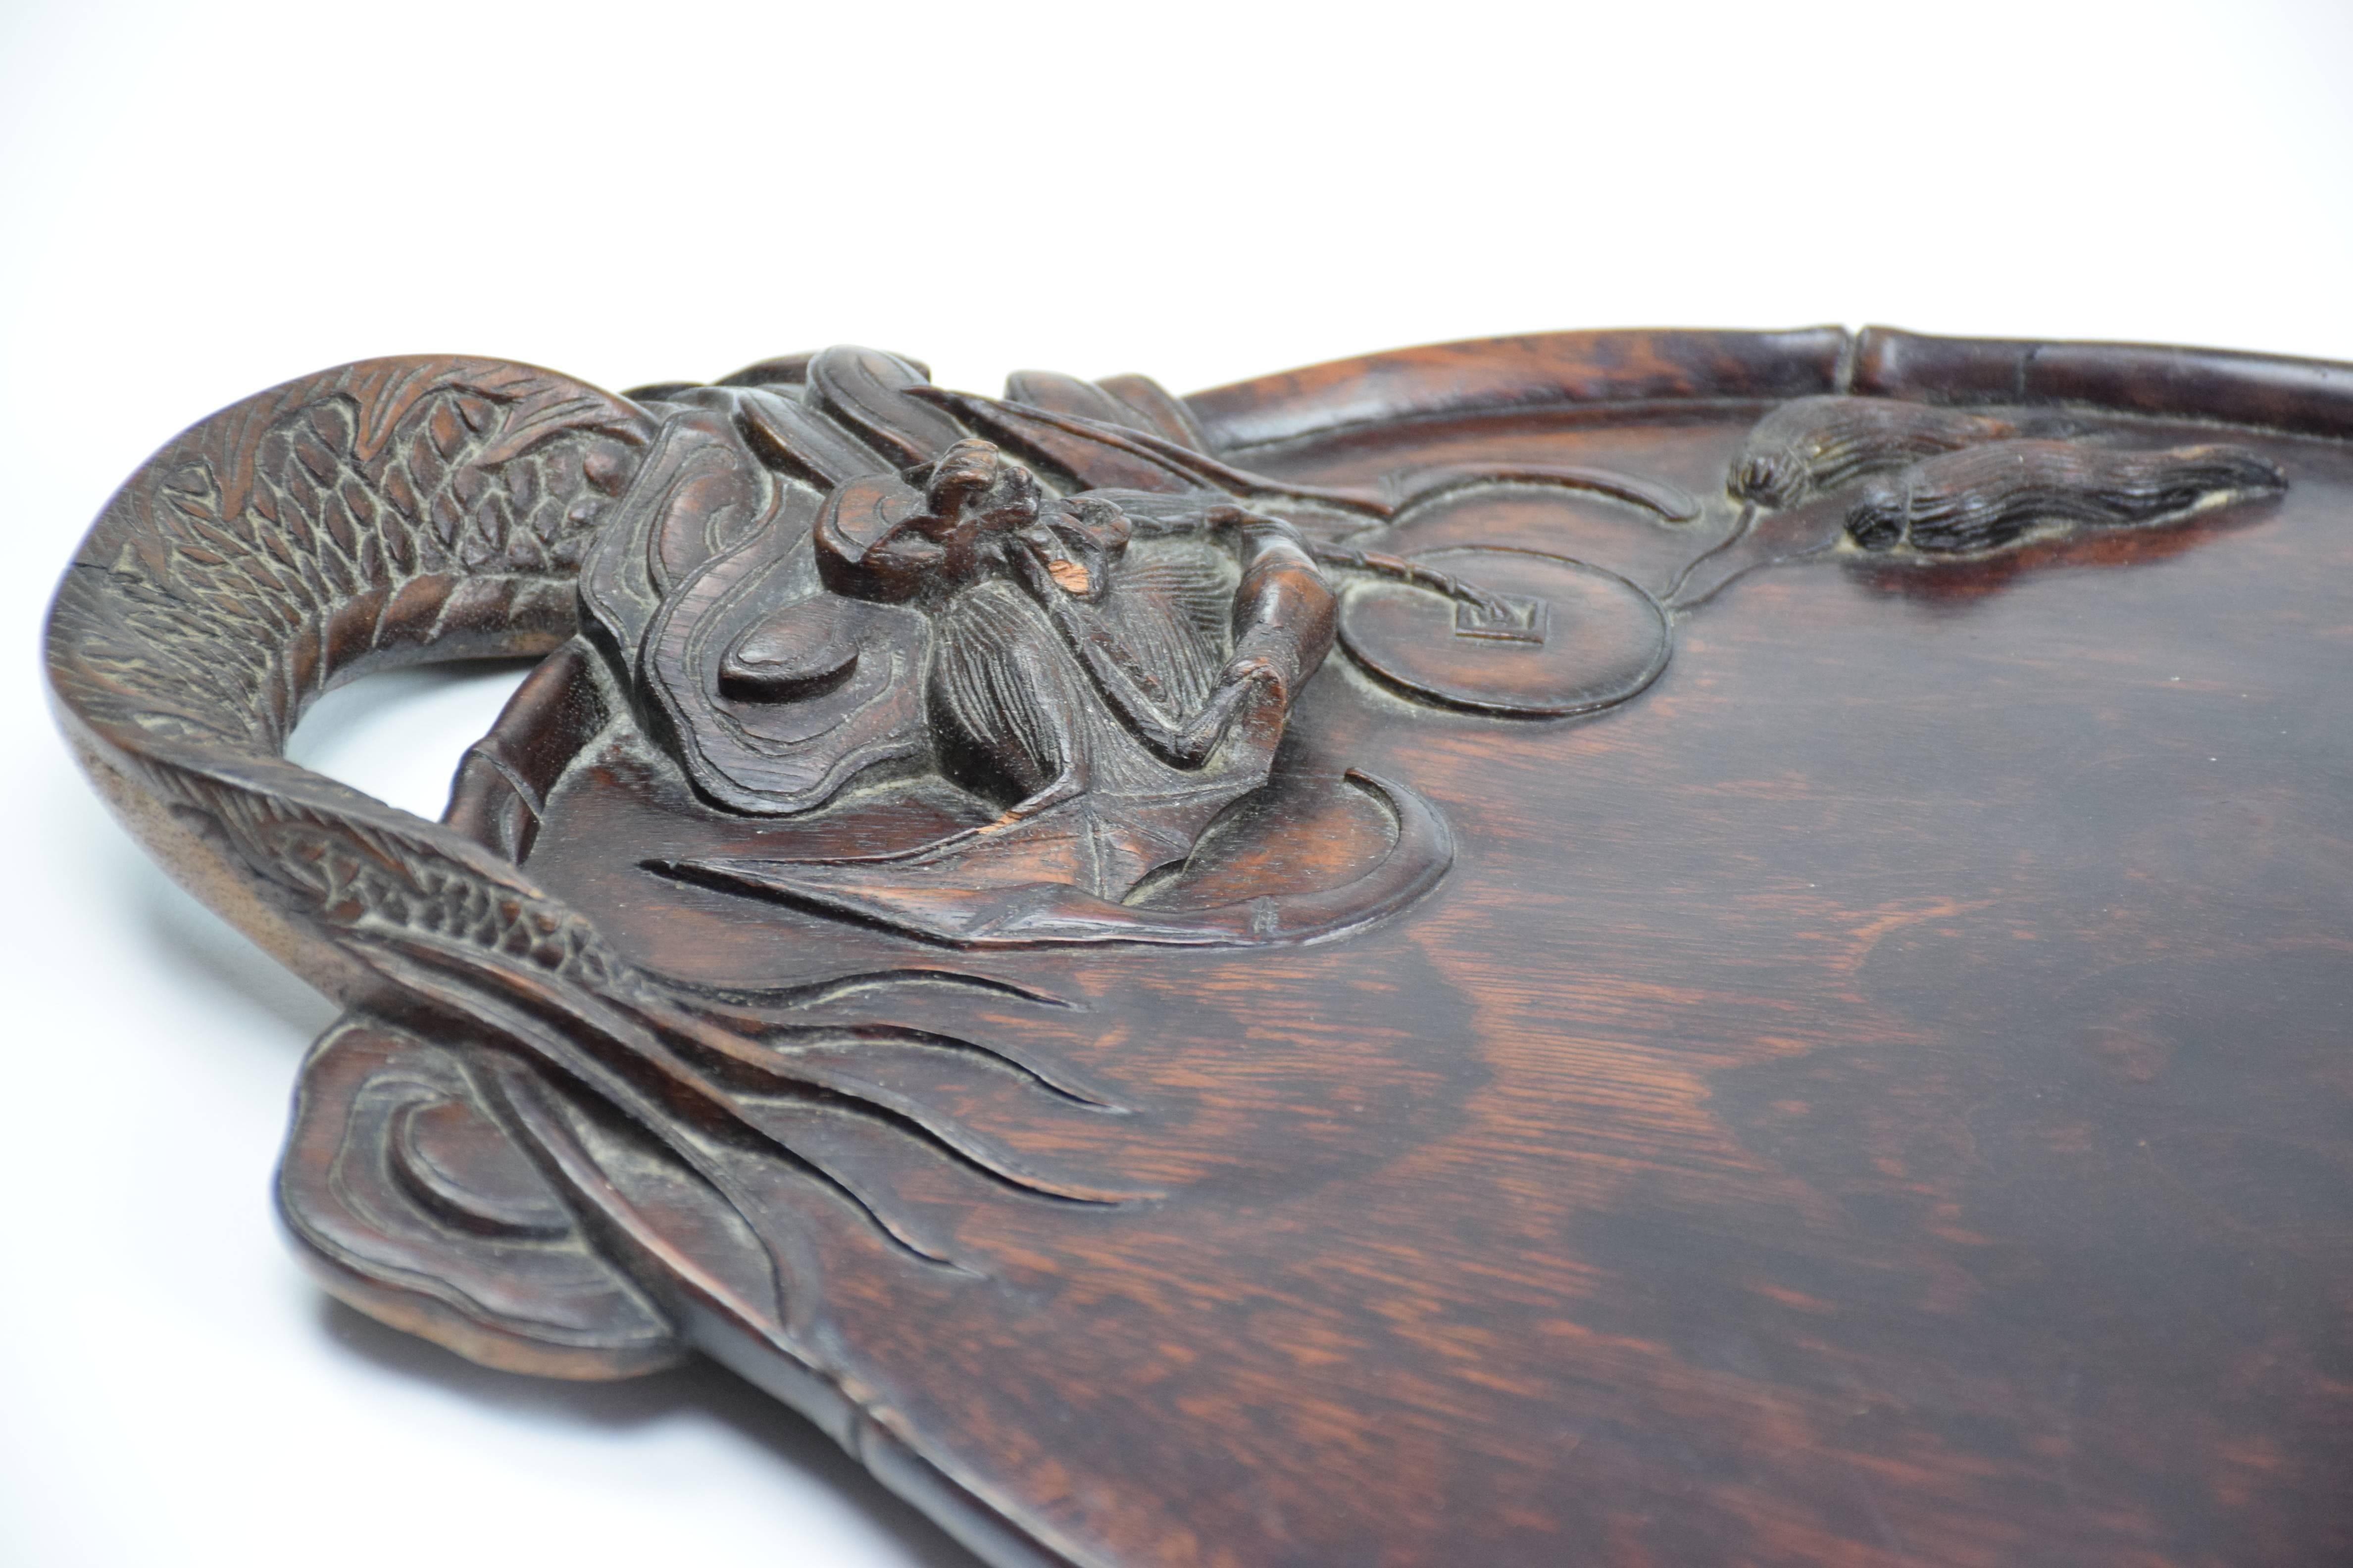 A fine antique Chinese two-handled serving tray carved from a single piece of lacquered softwood with intricate dragon shaped handles. Could also be used as a decorative wall piece.

China, end of 19th century.